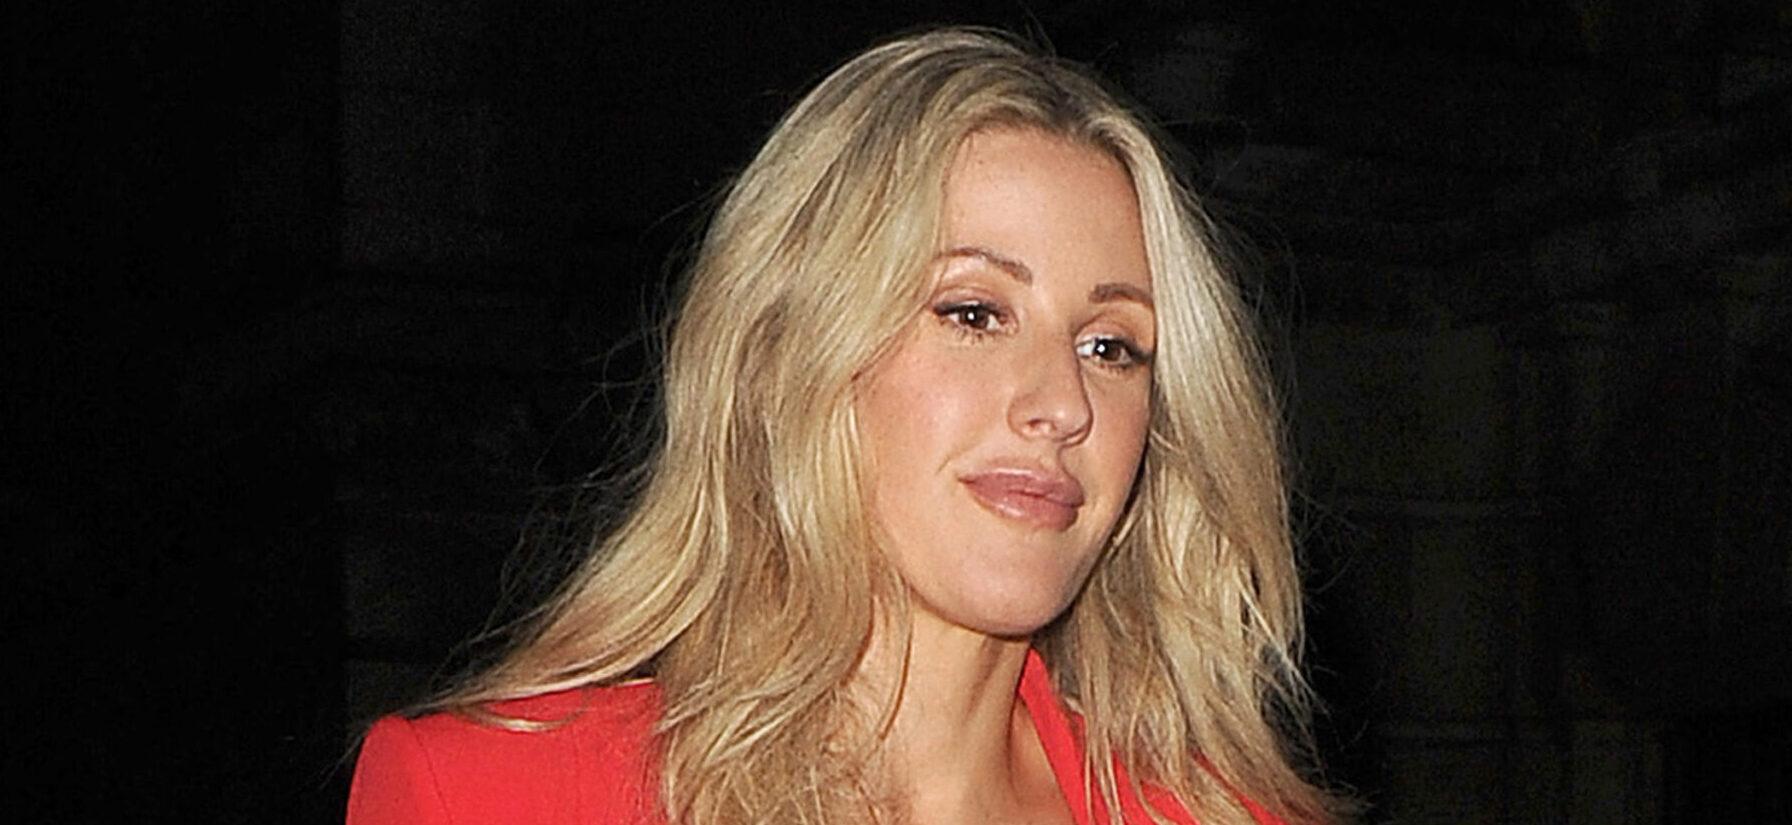 Ellie Goulding leaving The Victoria & Albert Museum, having performed a private gig there. Ellie wore a red cape, red boots and red hot pants, as well as a red lace bra. She was joined by her husband Caspar Jopling